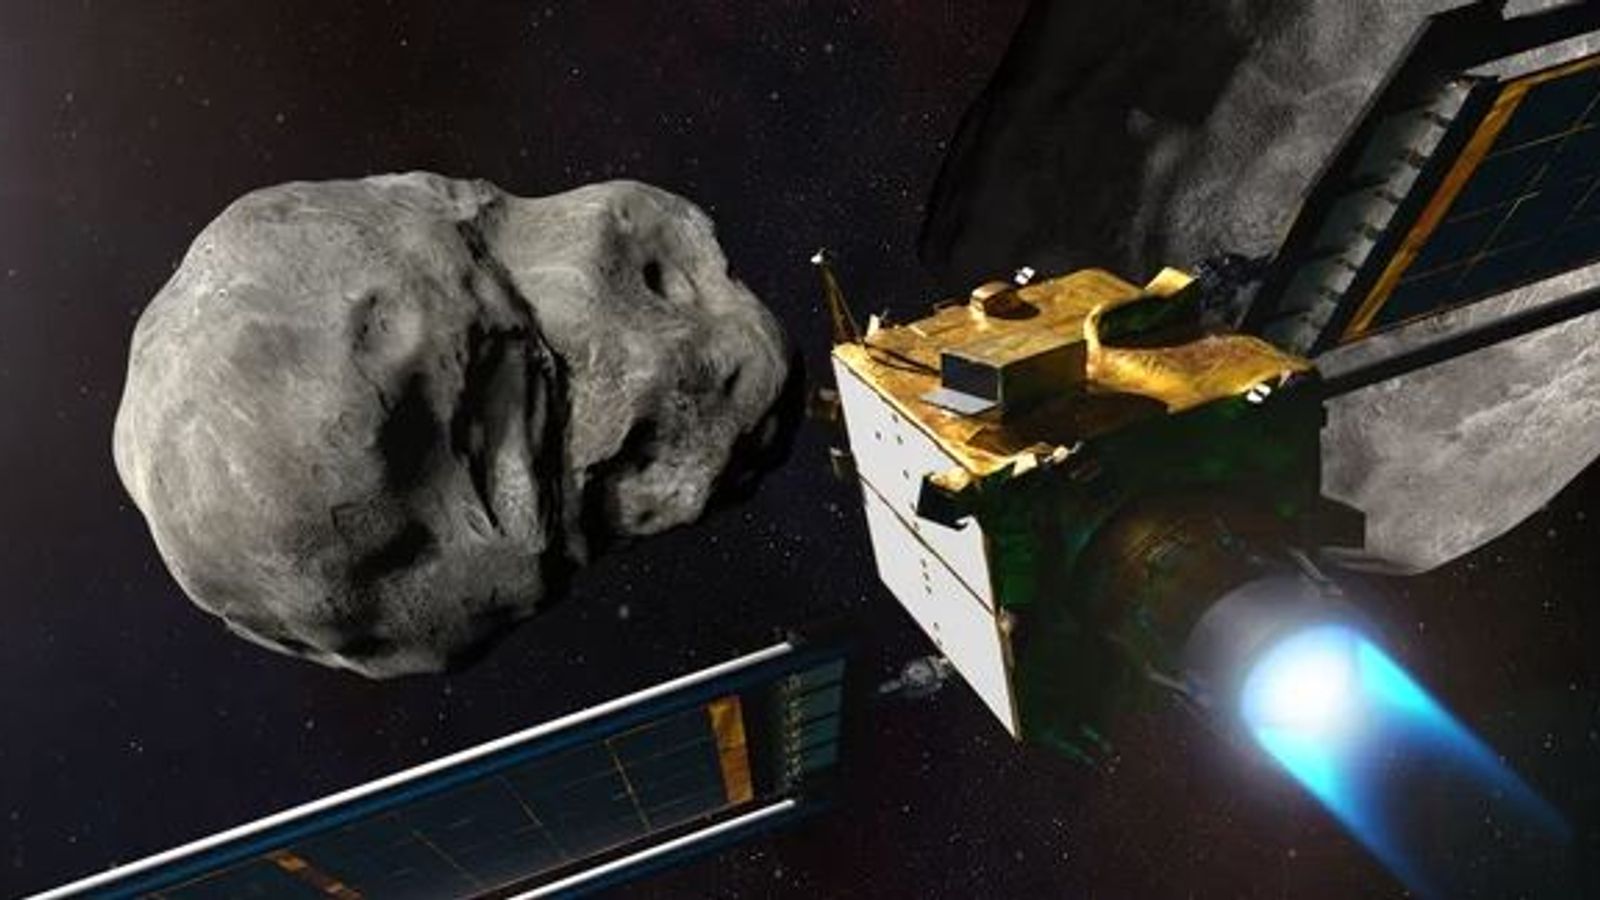 Why is NASA crashing a spacecraft into a harmless asteroid at 14,000mph?